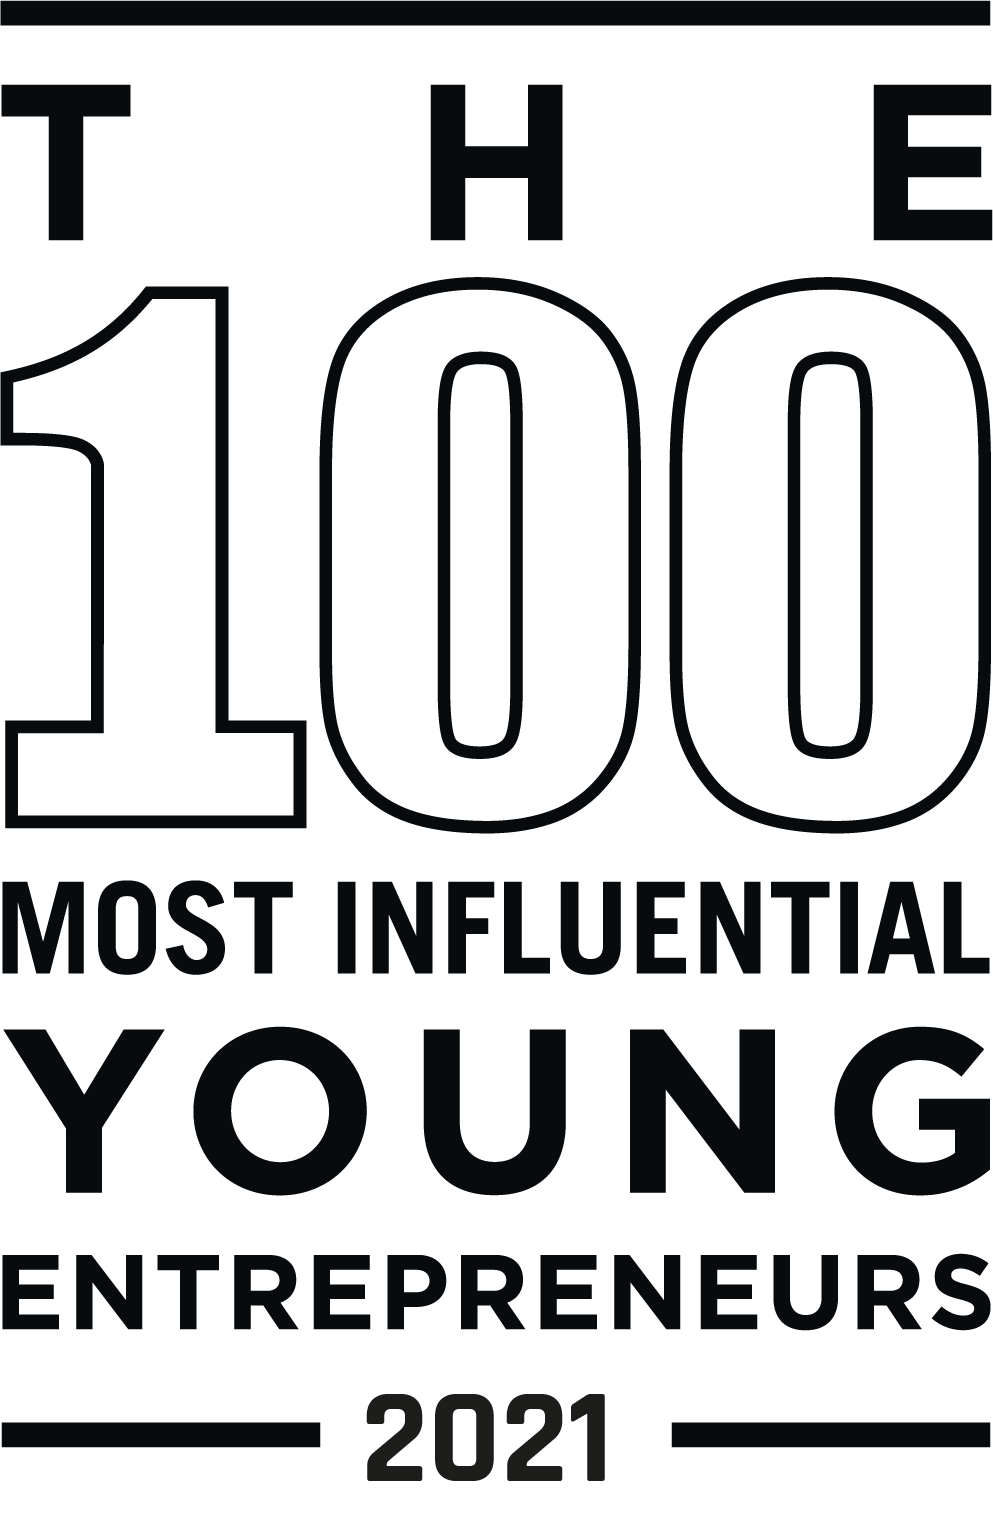 The 100 Most Influential Young Entrepreneurs